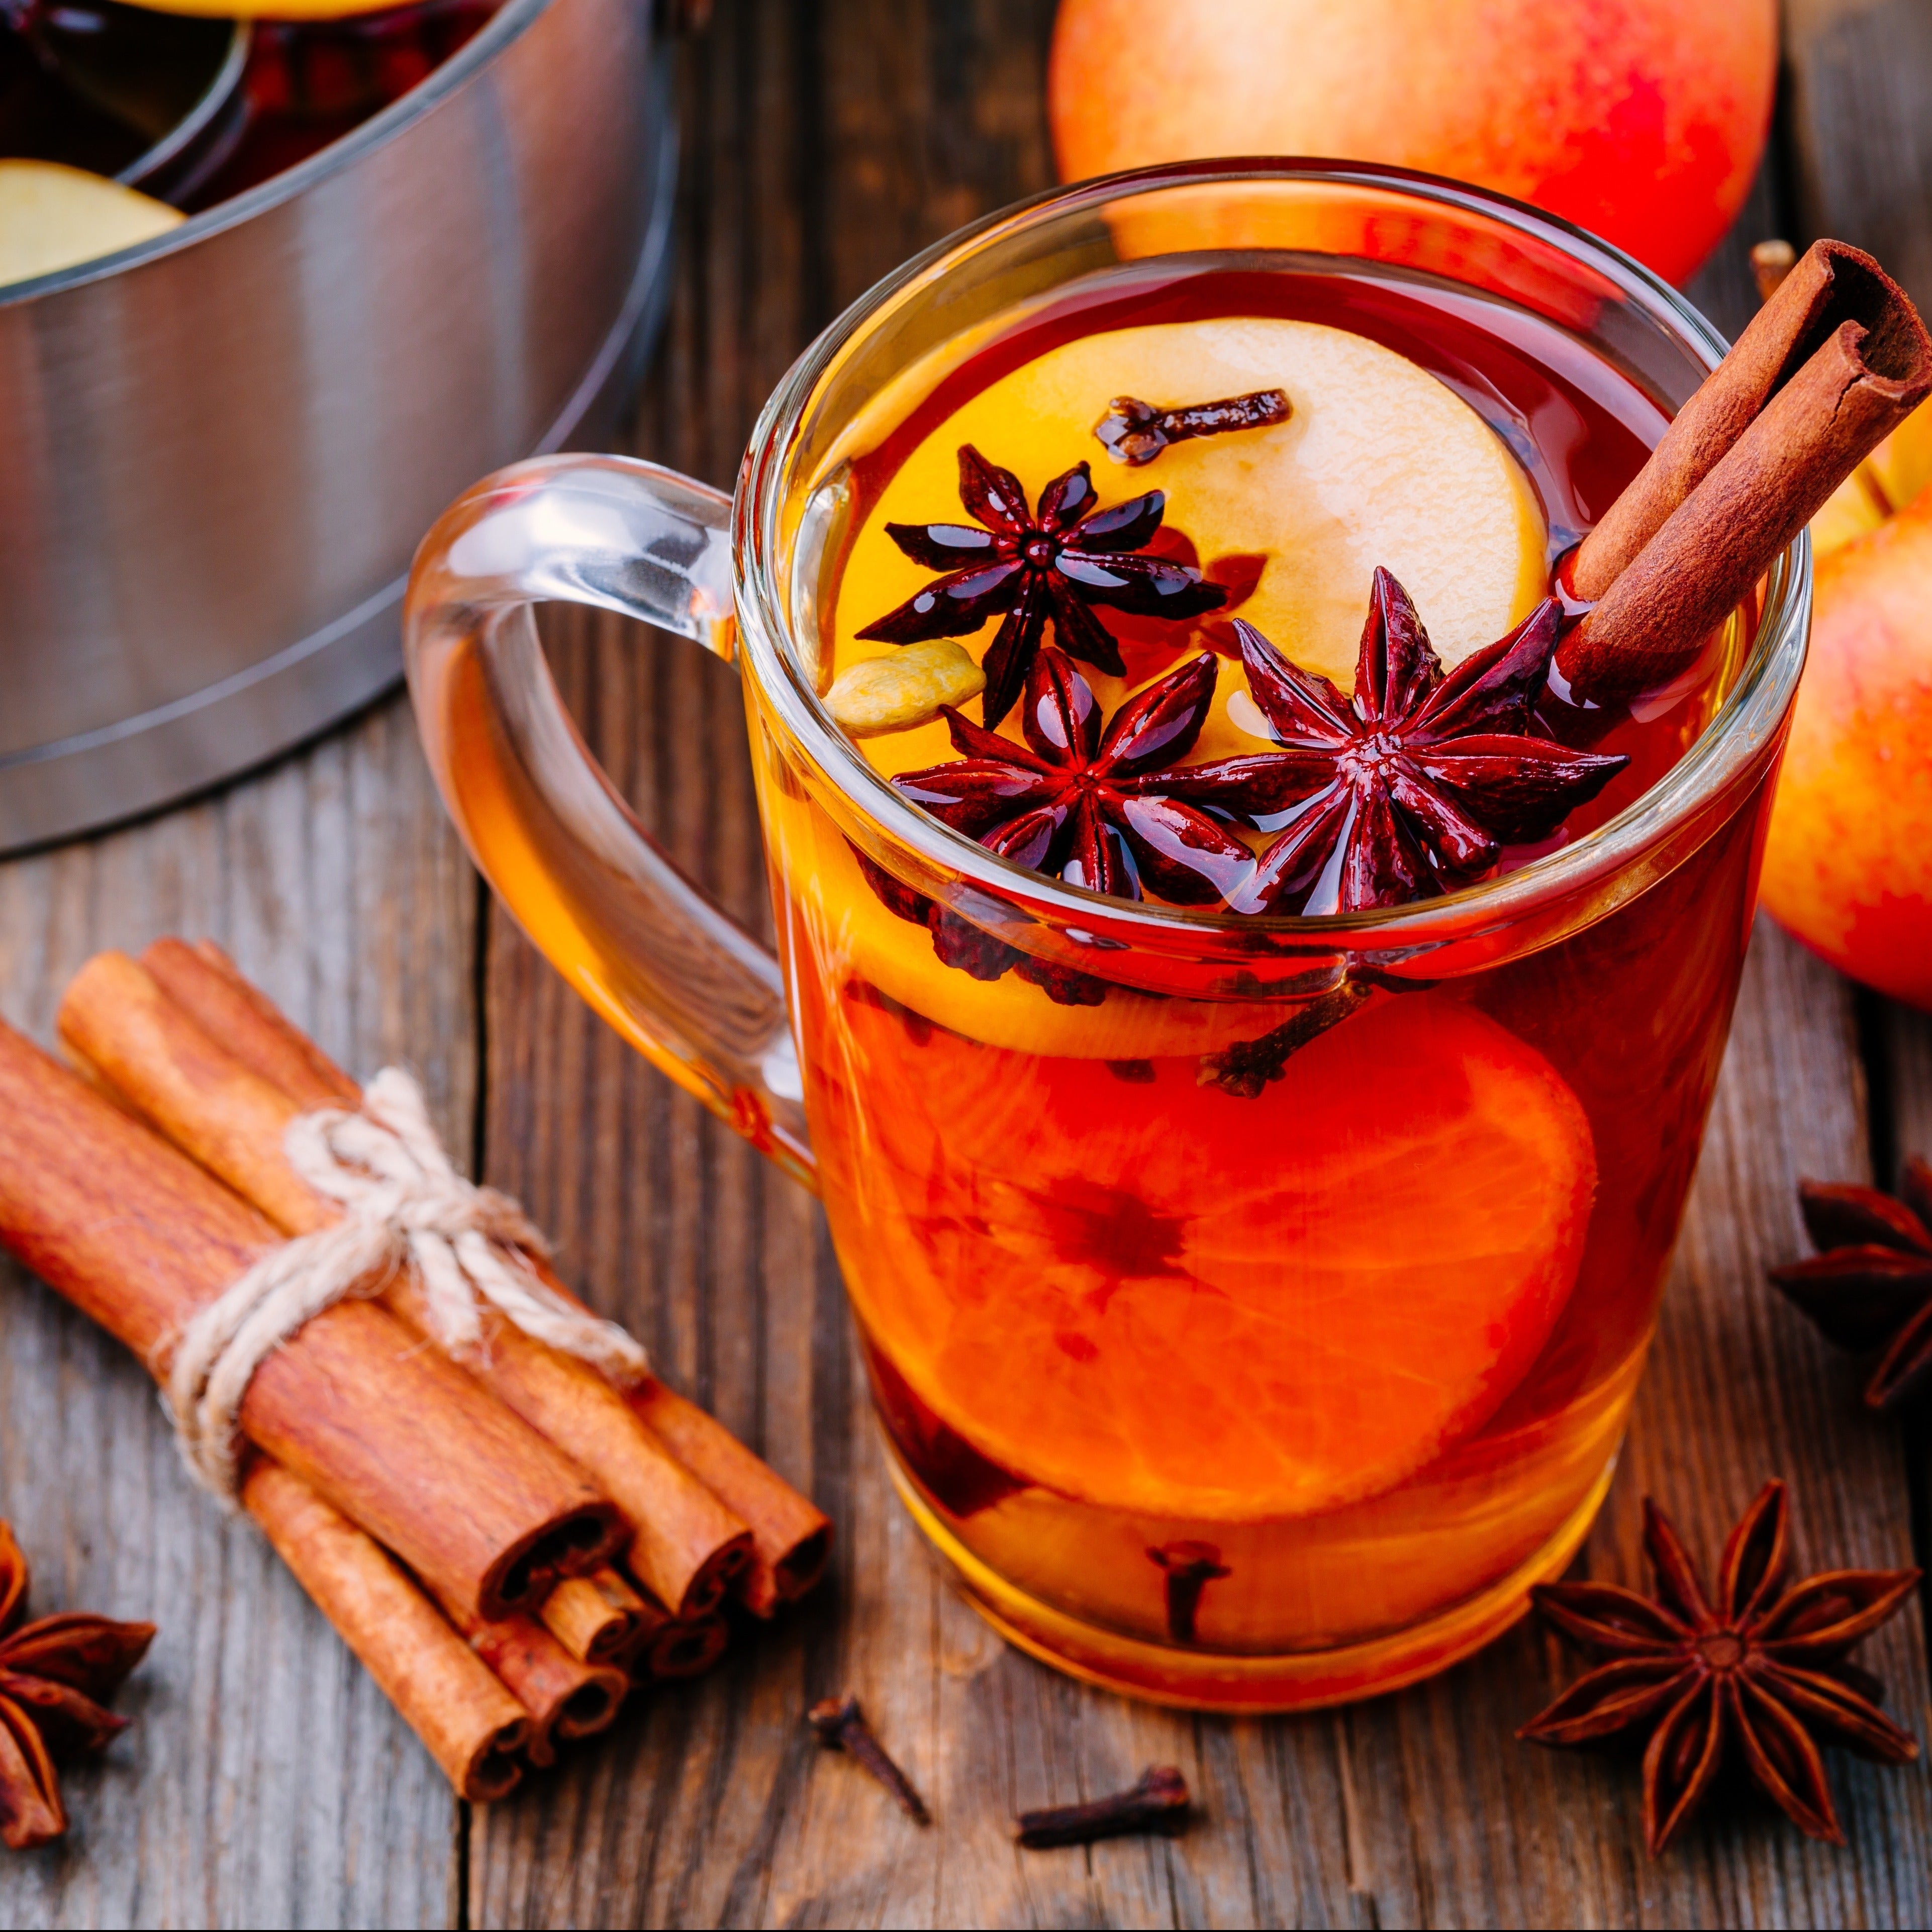 A Citrus Clove Cider scented wax melt (2.5 oz) from Tuscany Candle®, emitting the warm fragrance notes of mulled cider, accompanied by cinnamon sticks and apples.